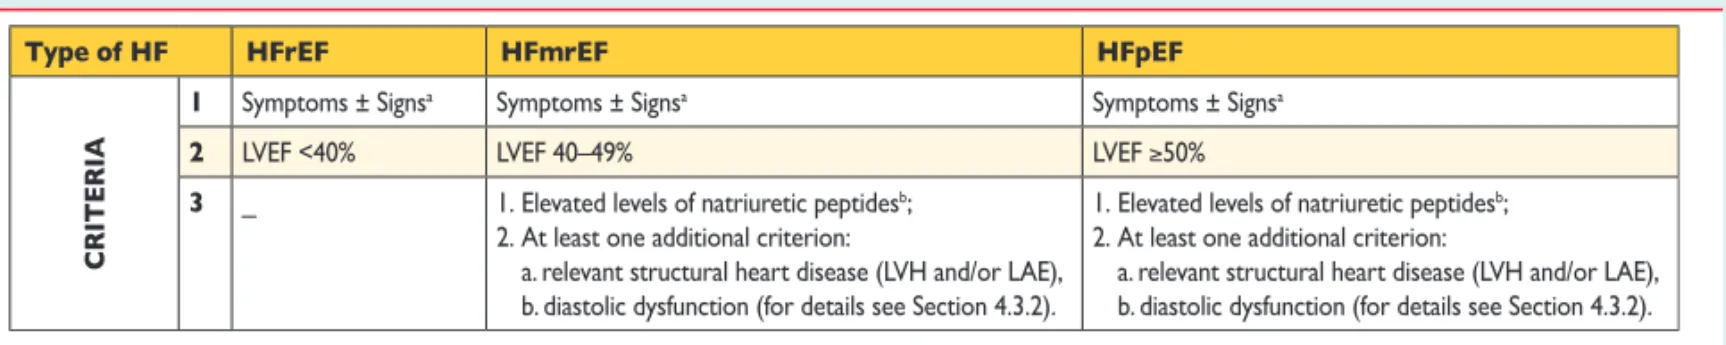 Table 3.1 Definition of heart failure with preserved (HFpEF), mid-range (HFmrEF) and reduced ejection fraction (HFrEF)